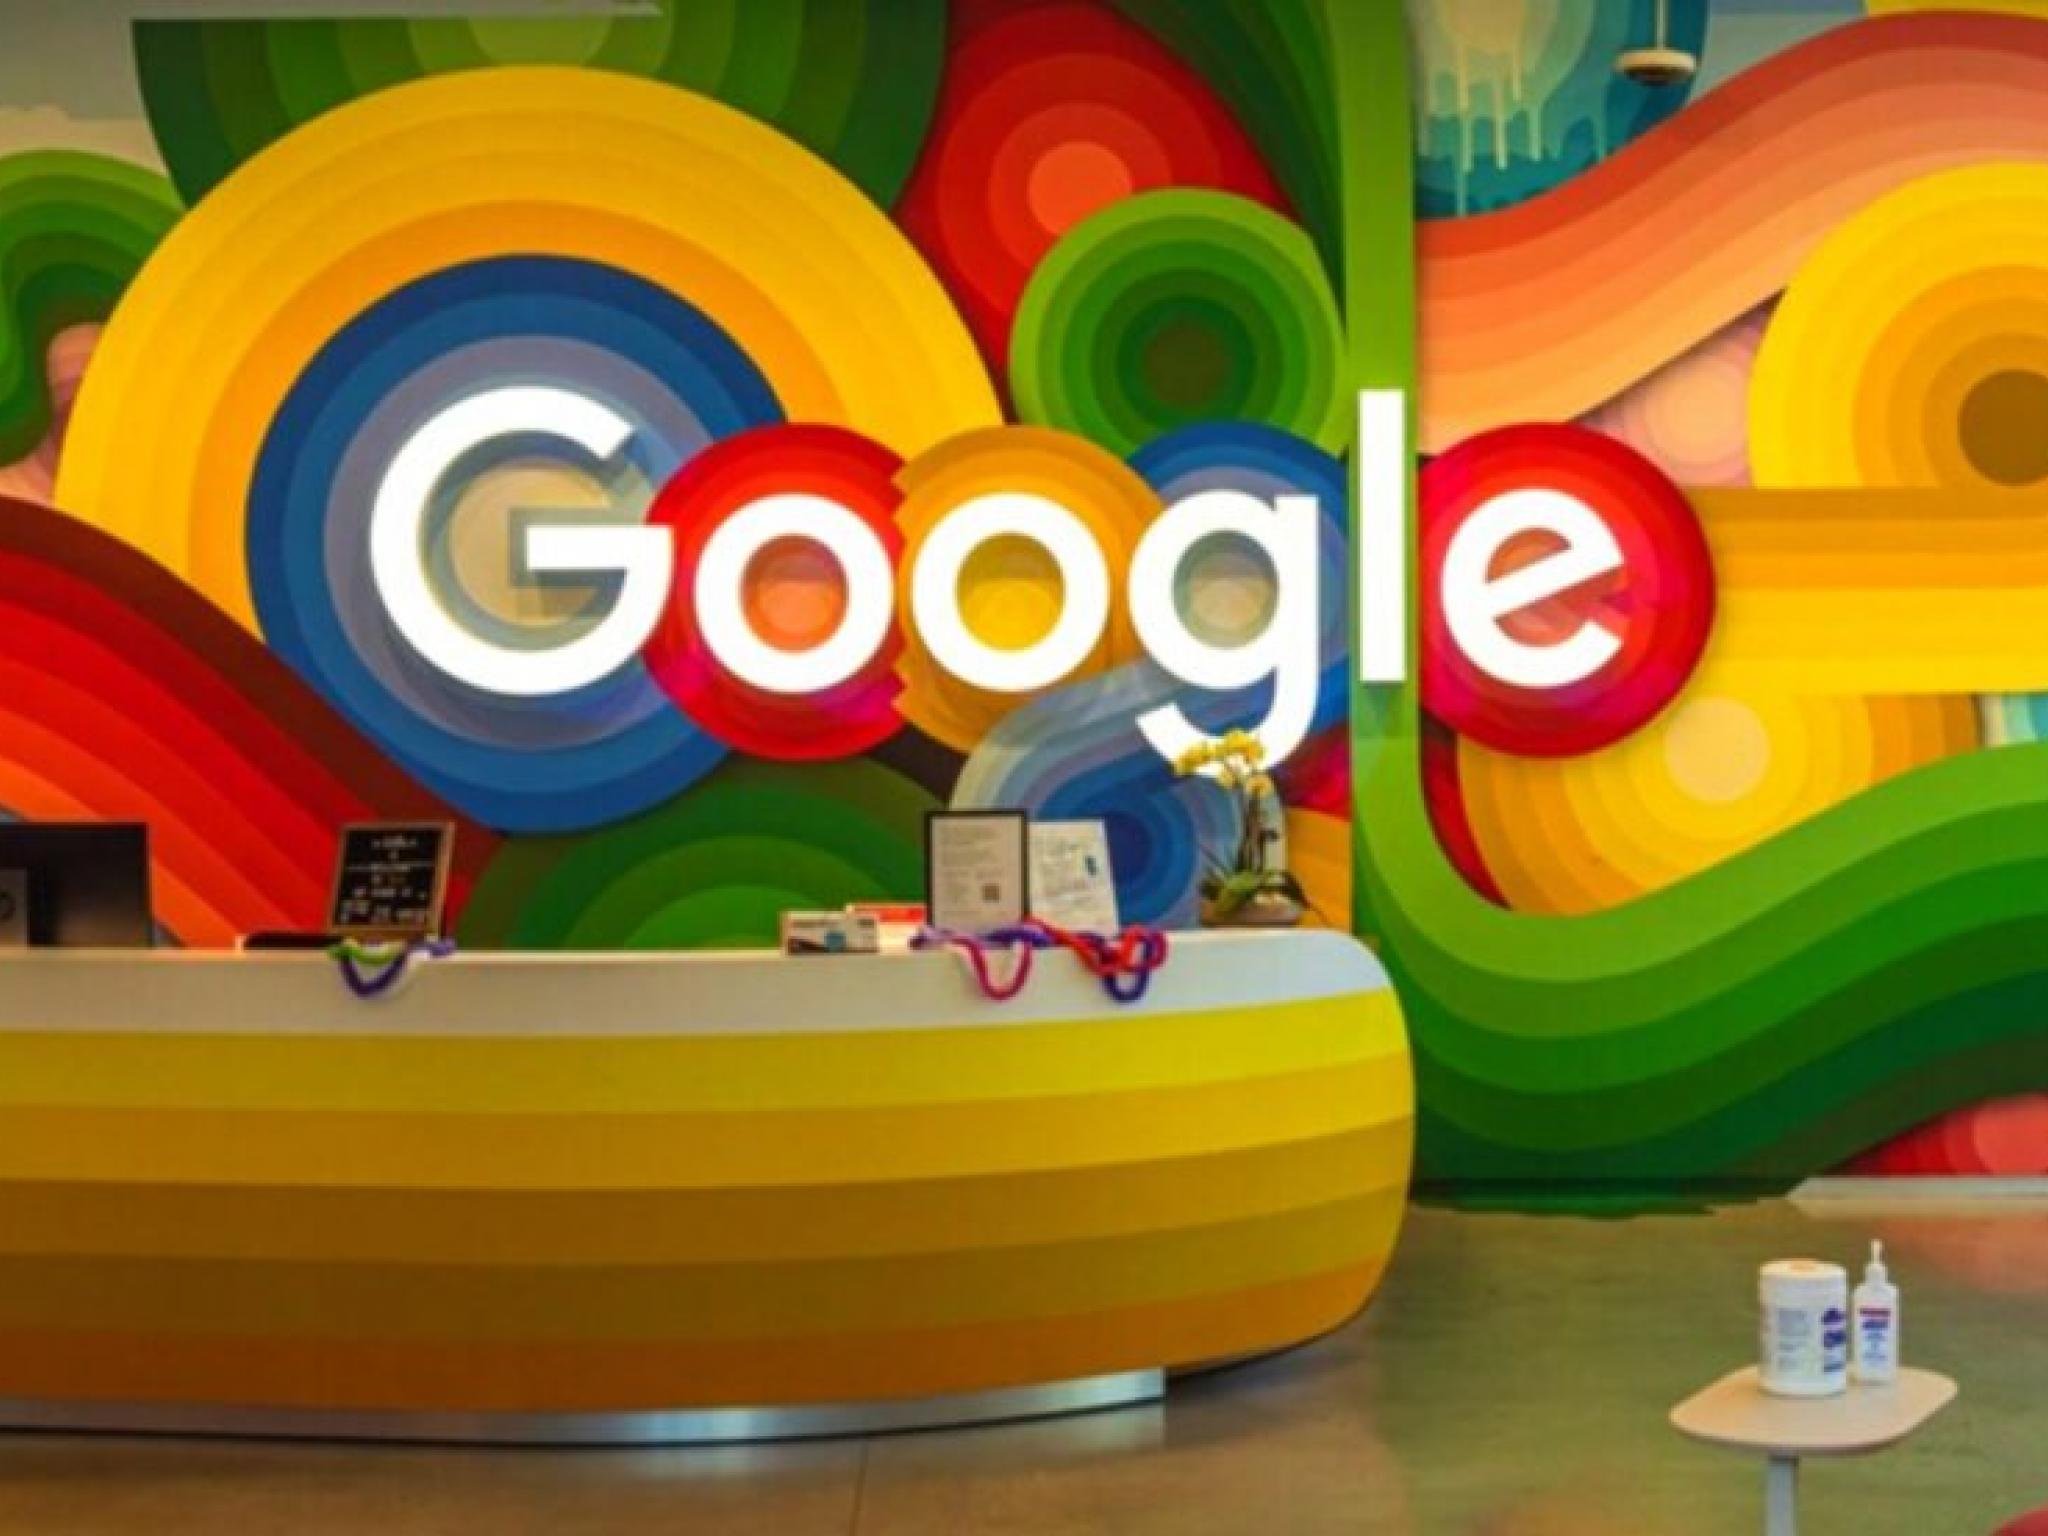  google-pledges-2b-for-data-centre-and-cloud-services-in-malaysia 